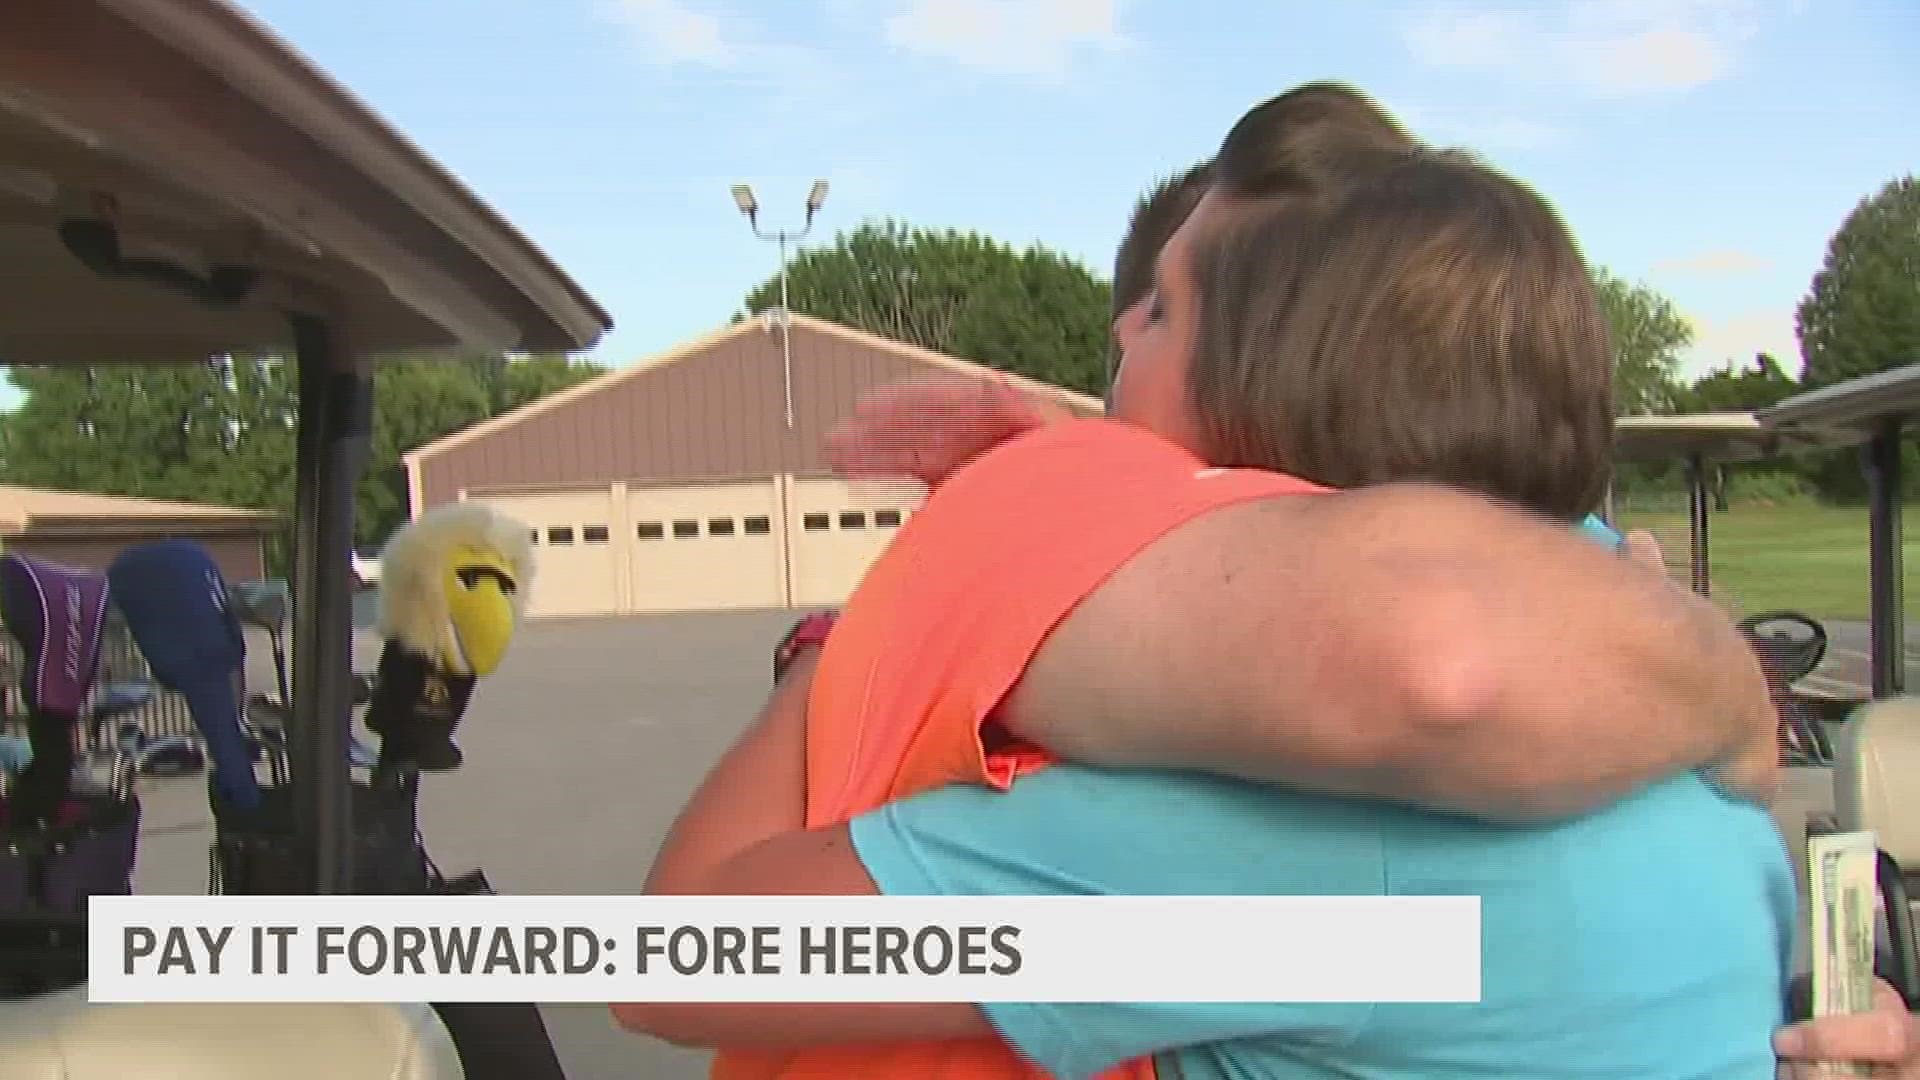 Shane has raised thousands of dollars for families of fallen first responders. It's his incredible work that has earned him the Pay It Forward Award.